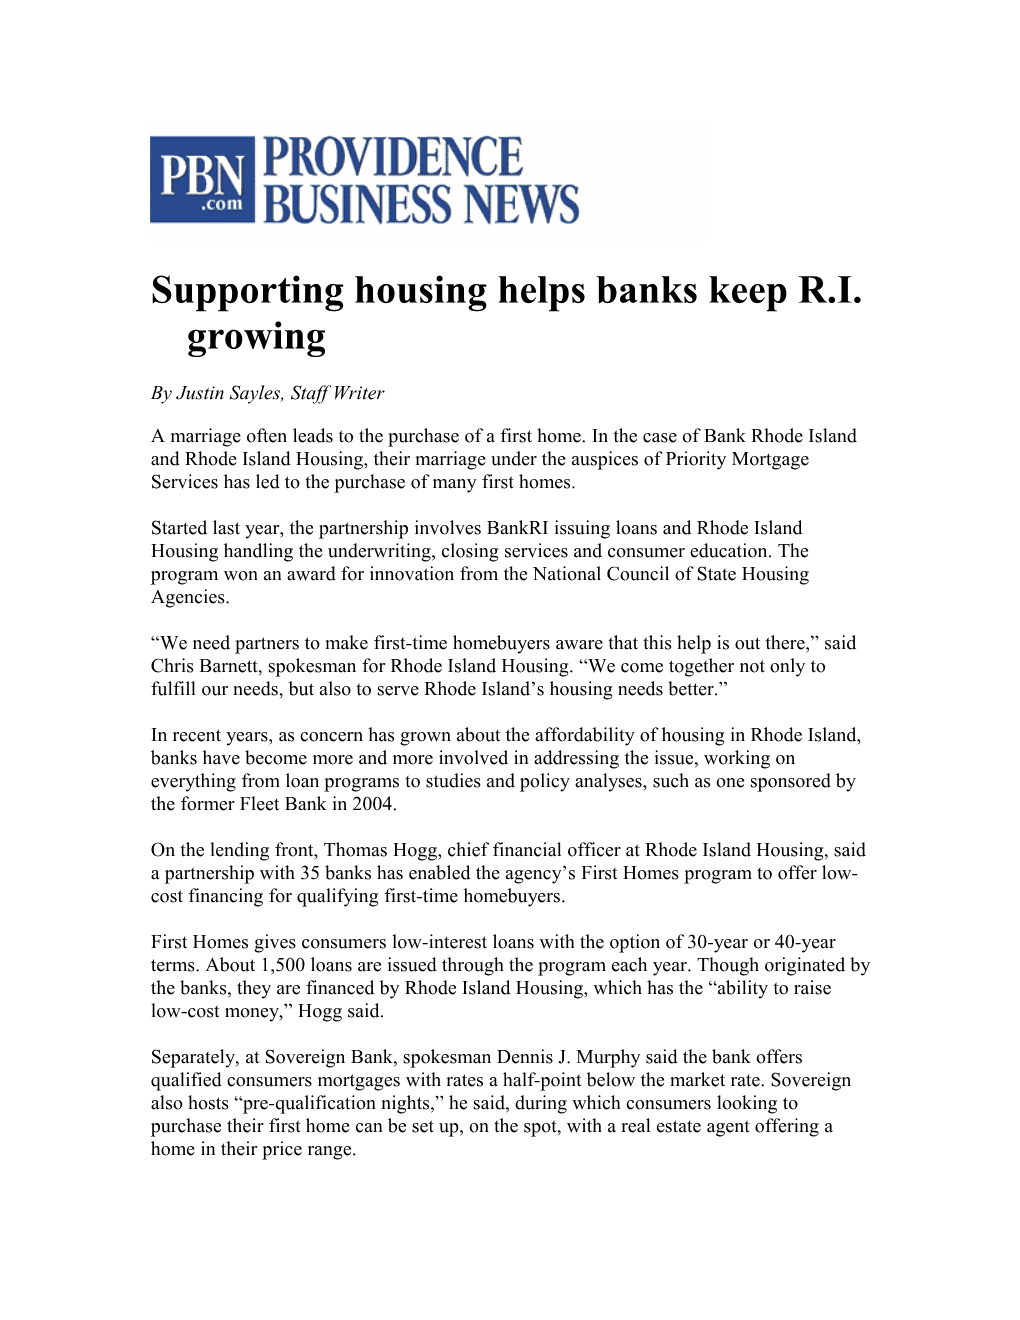 Supporting Housing Helps Banks Keep R.I. Growing